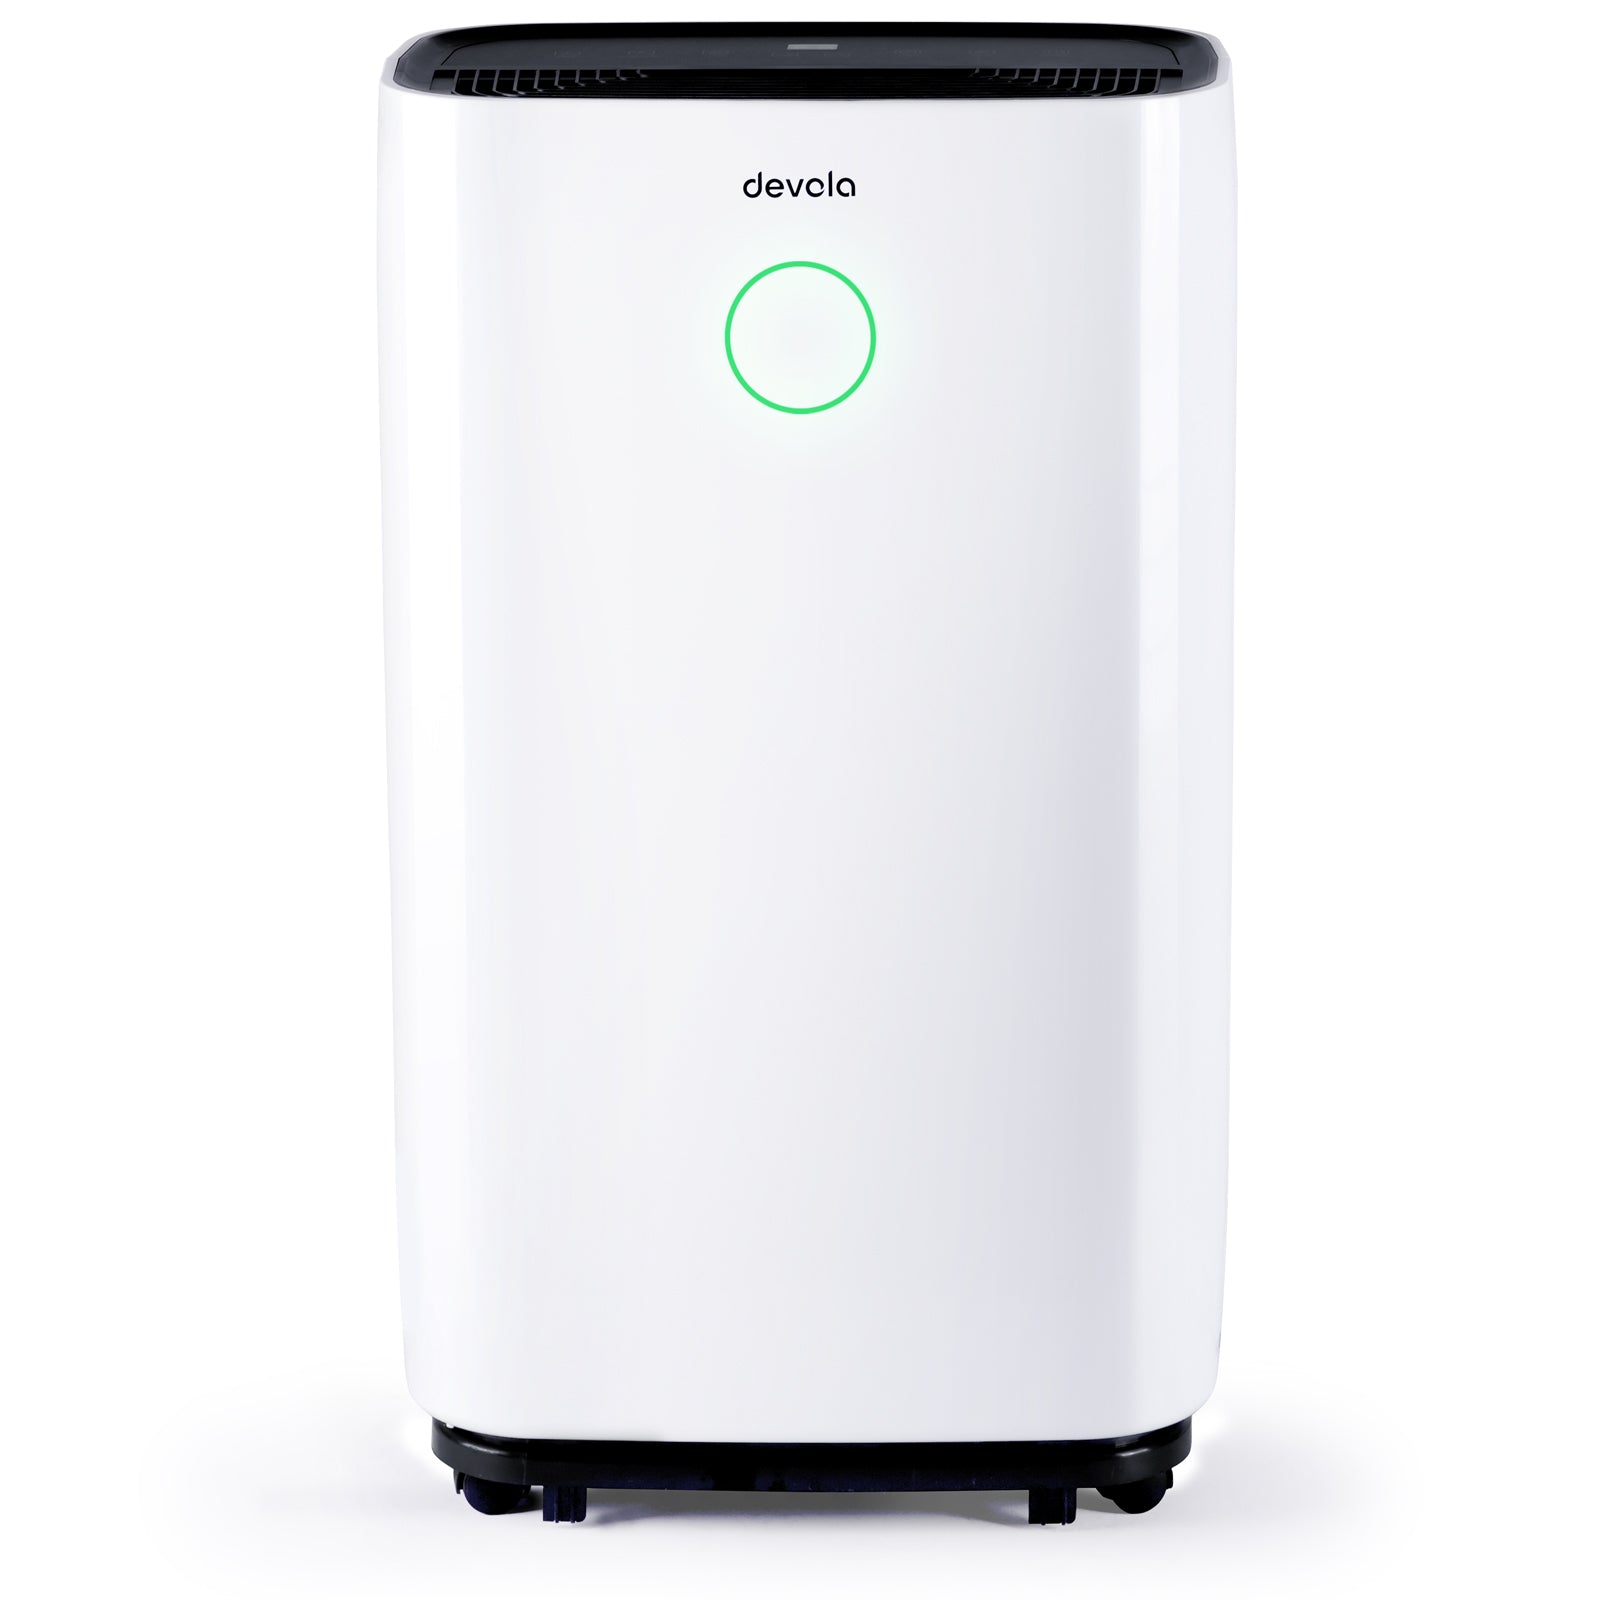 Image of a Devola 20 litre compressor Dehumidifier with a HEPA filter on a white background